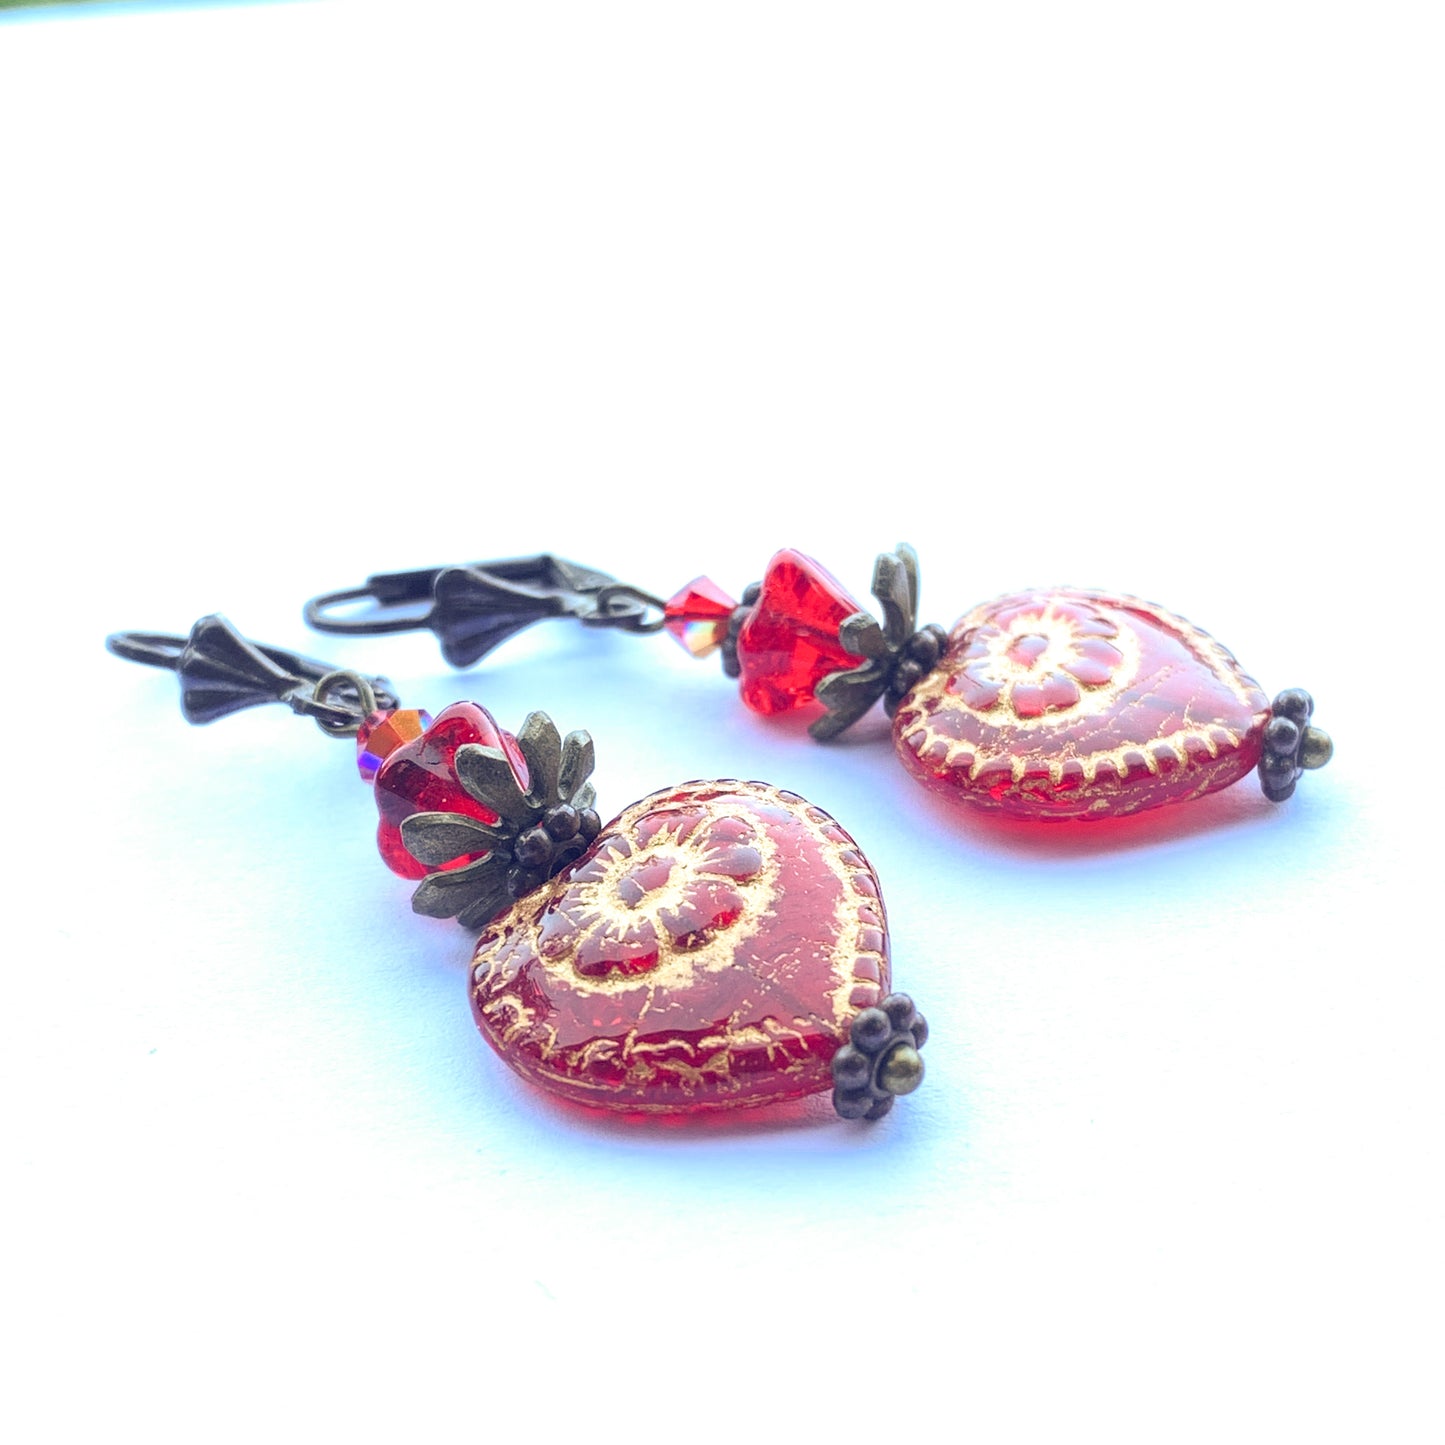 Victorian Valentine Earrings With Red Glass Hearts And Flowers In Antiqued Bronze. Niobium Ear-wire Option - Darkmoon Fayre